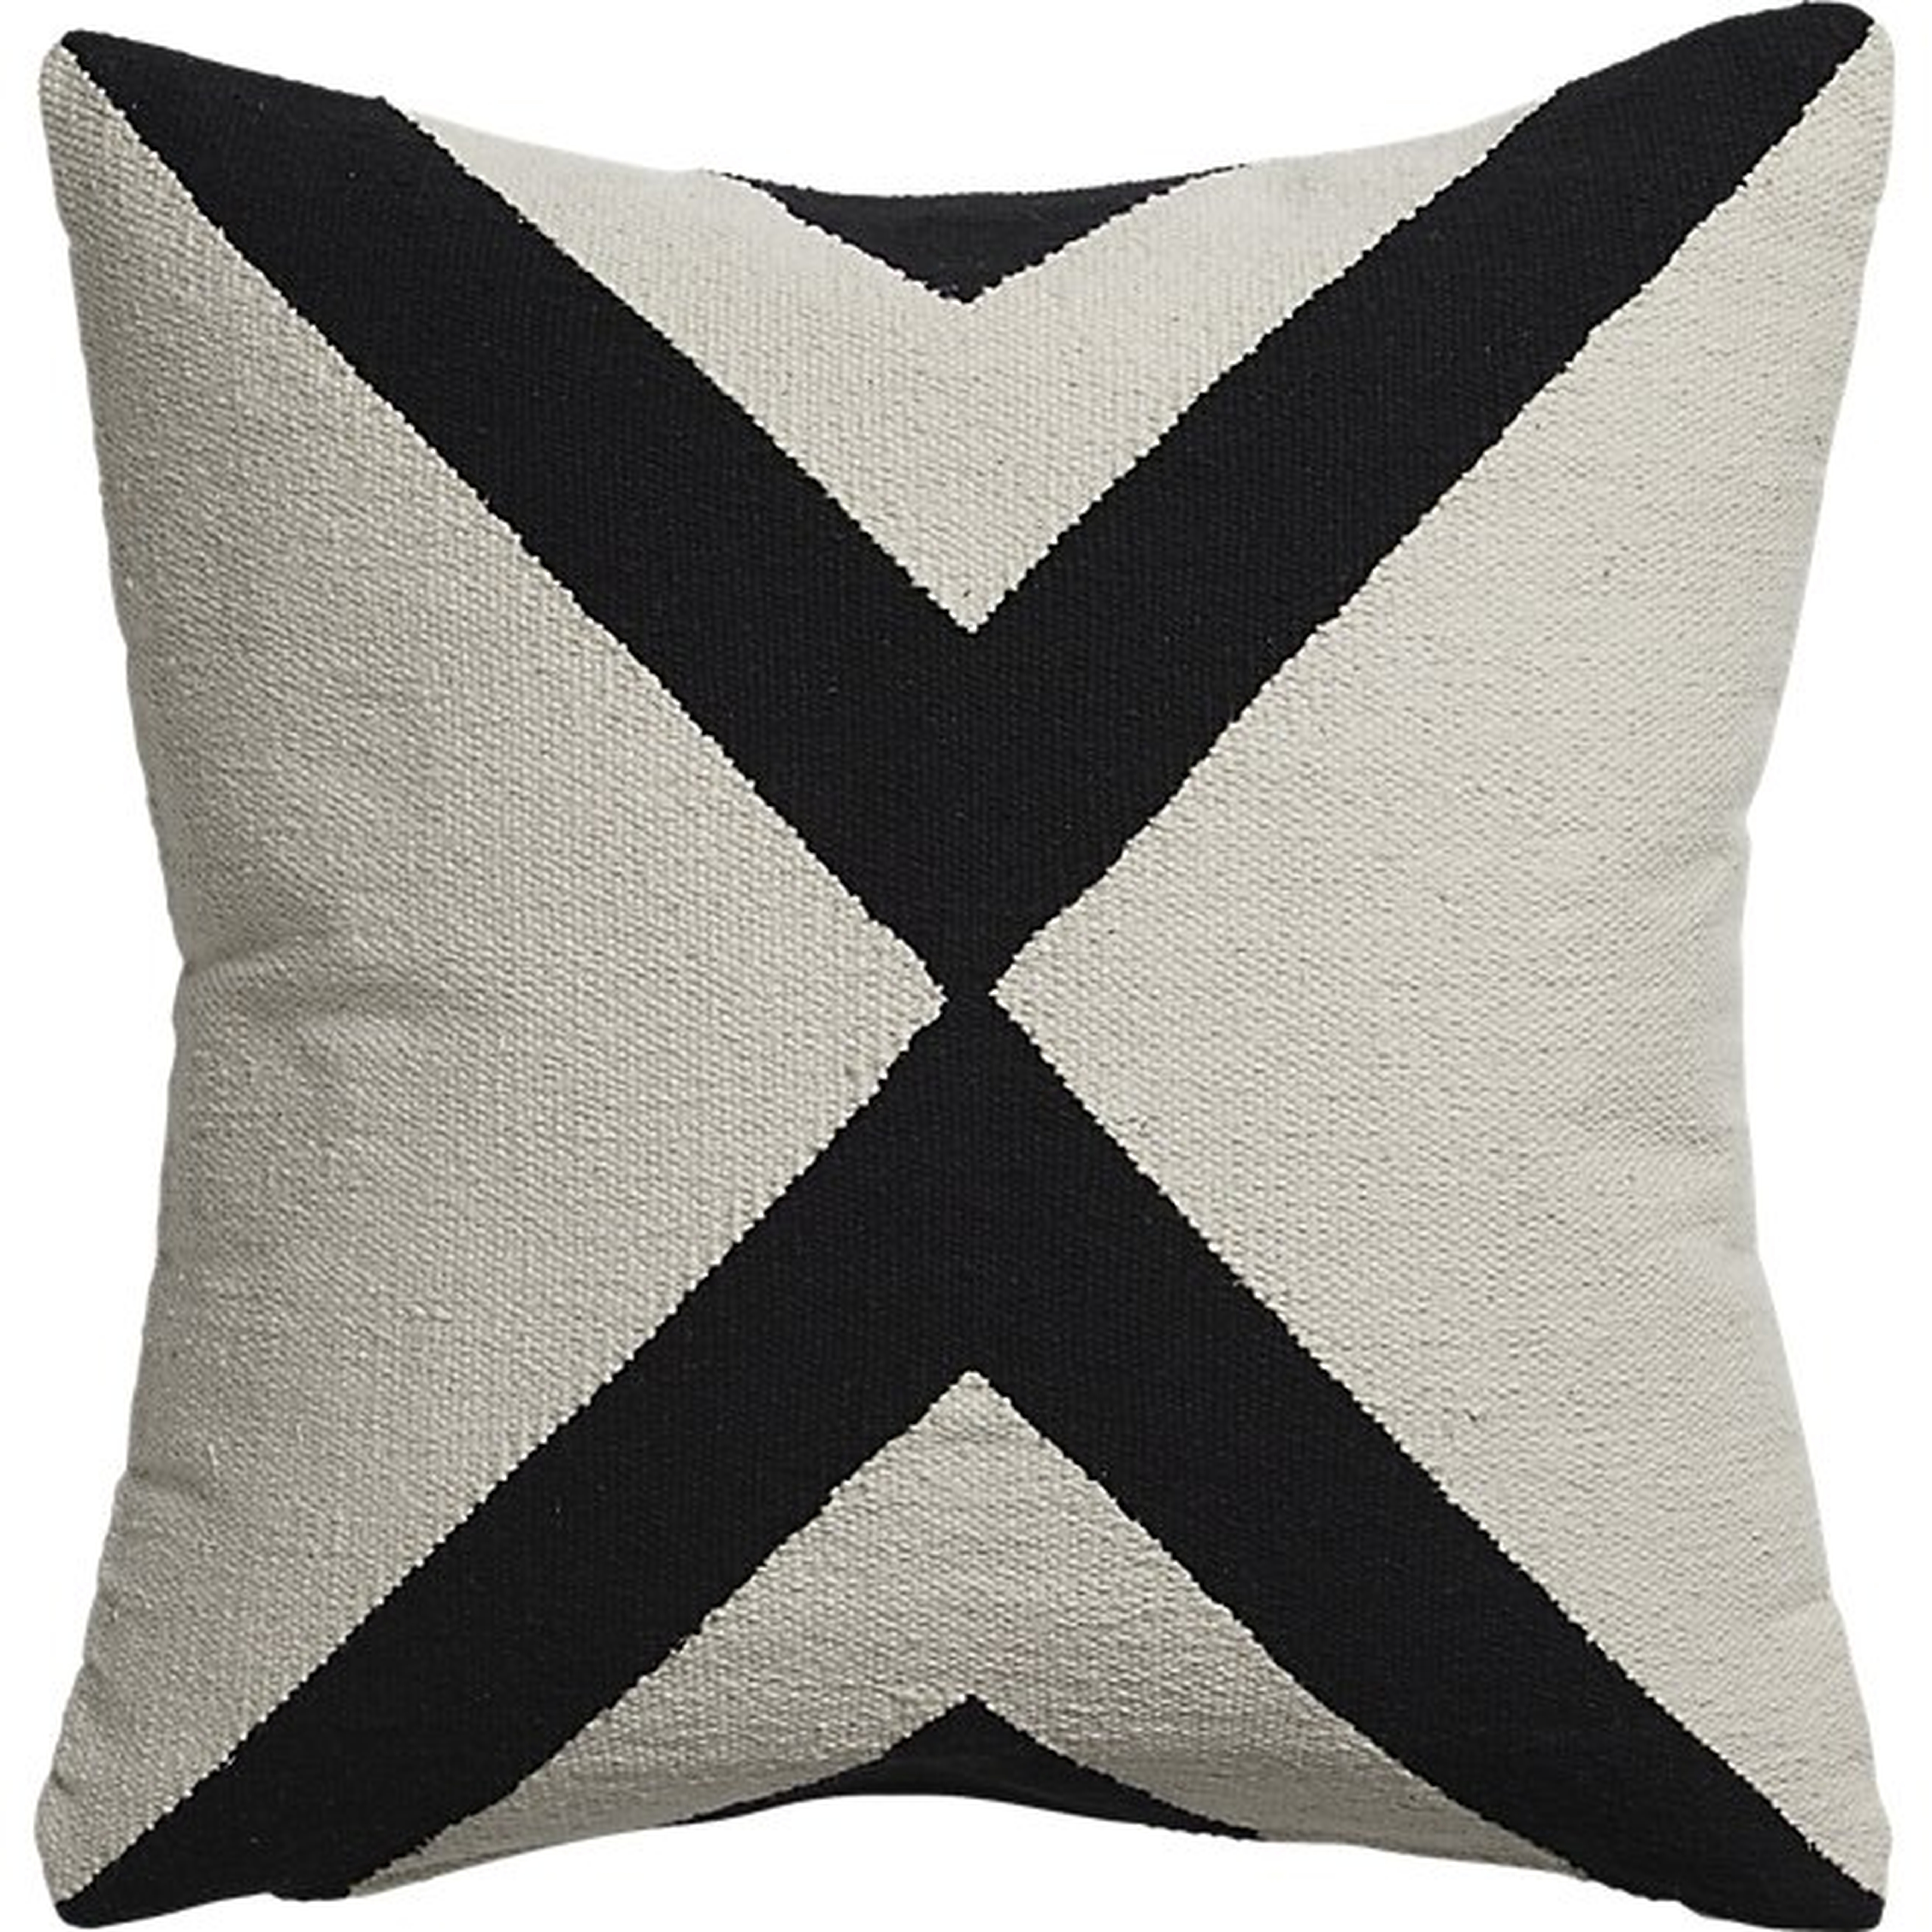 23" xbase pillow with feather-down insert - CB2